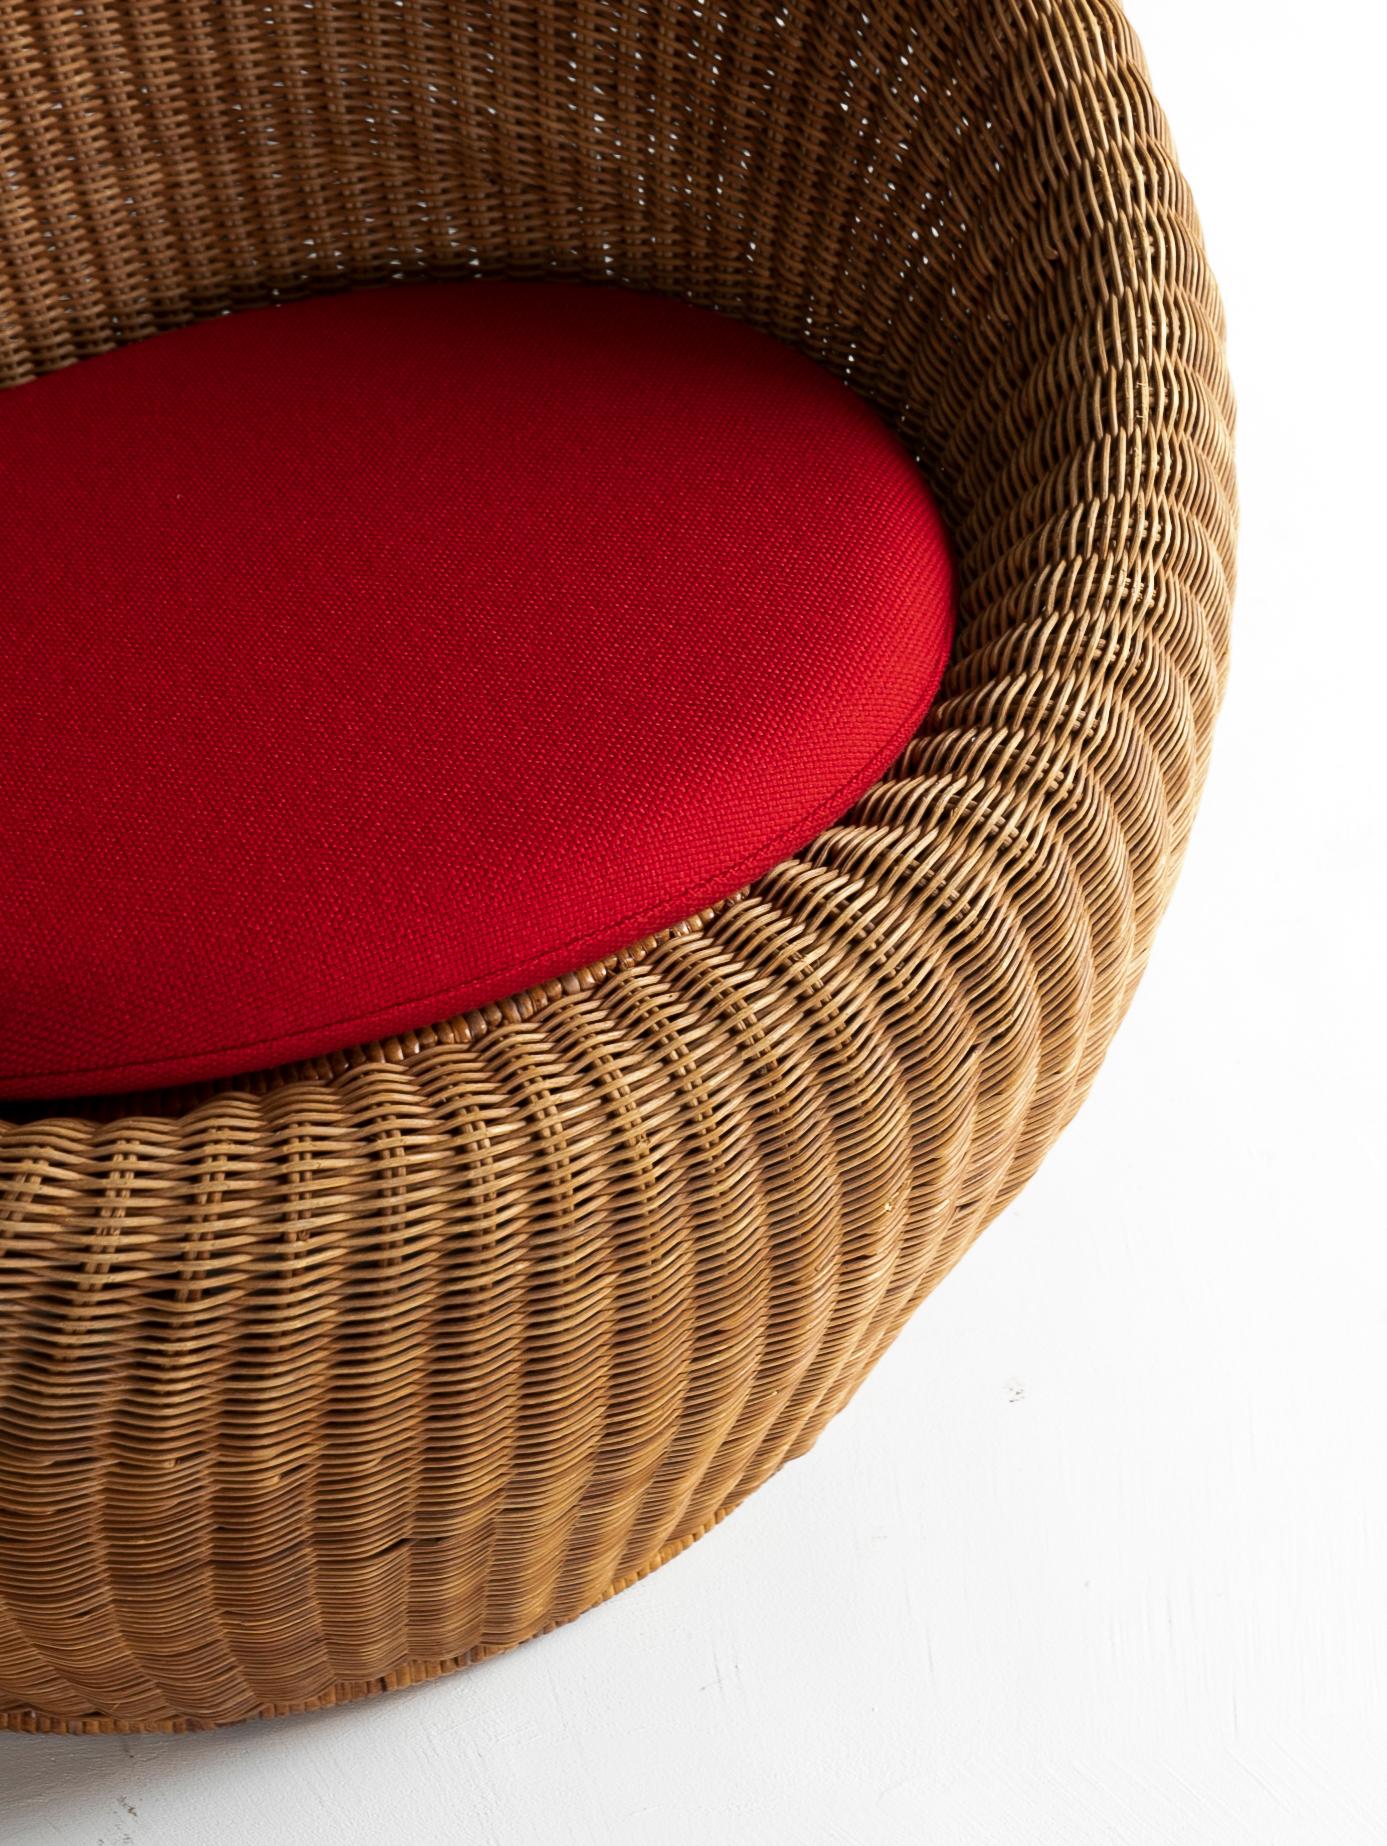 Japanese Rattan Rattan Lounge Chair by Isamu Kenmochi  , Circa 1980s For Sale